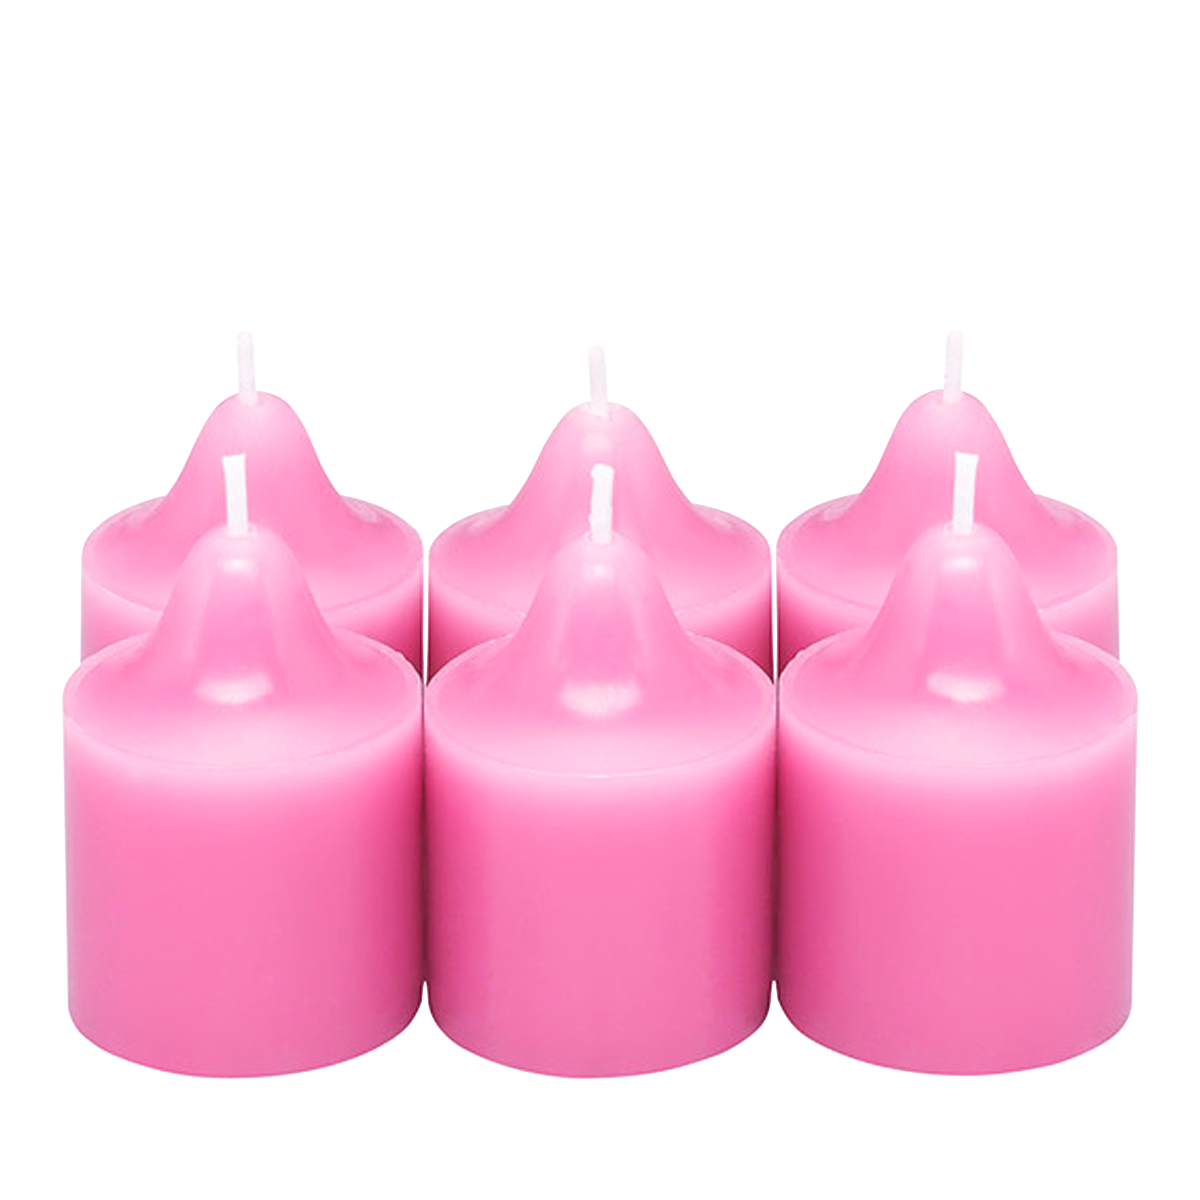 Berry Vanilla Scented Votive Candles - PartyLite US